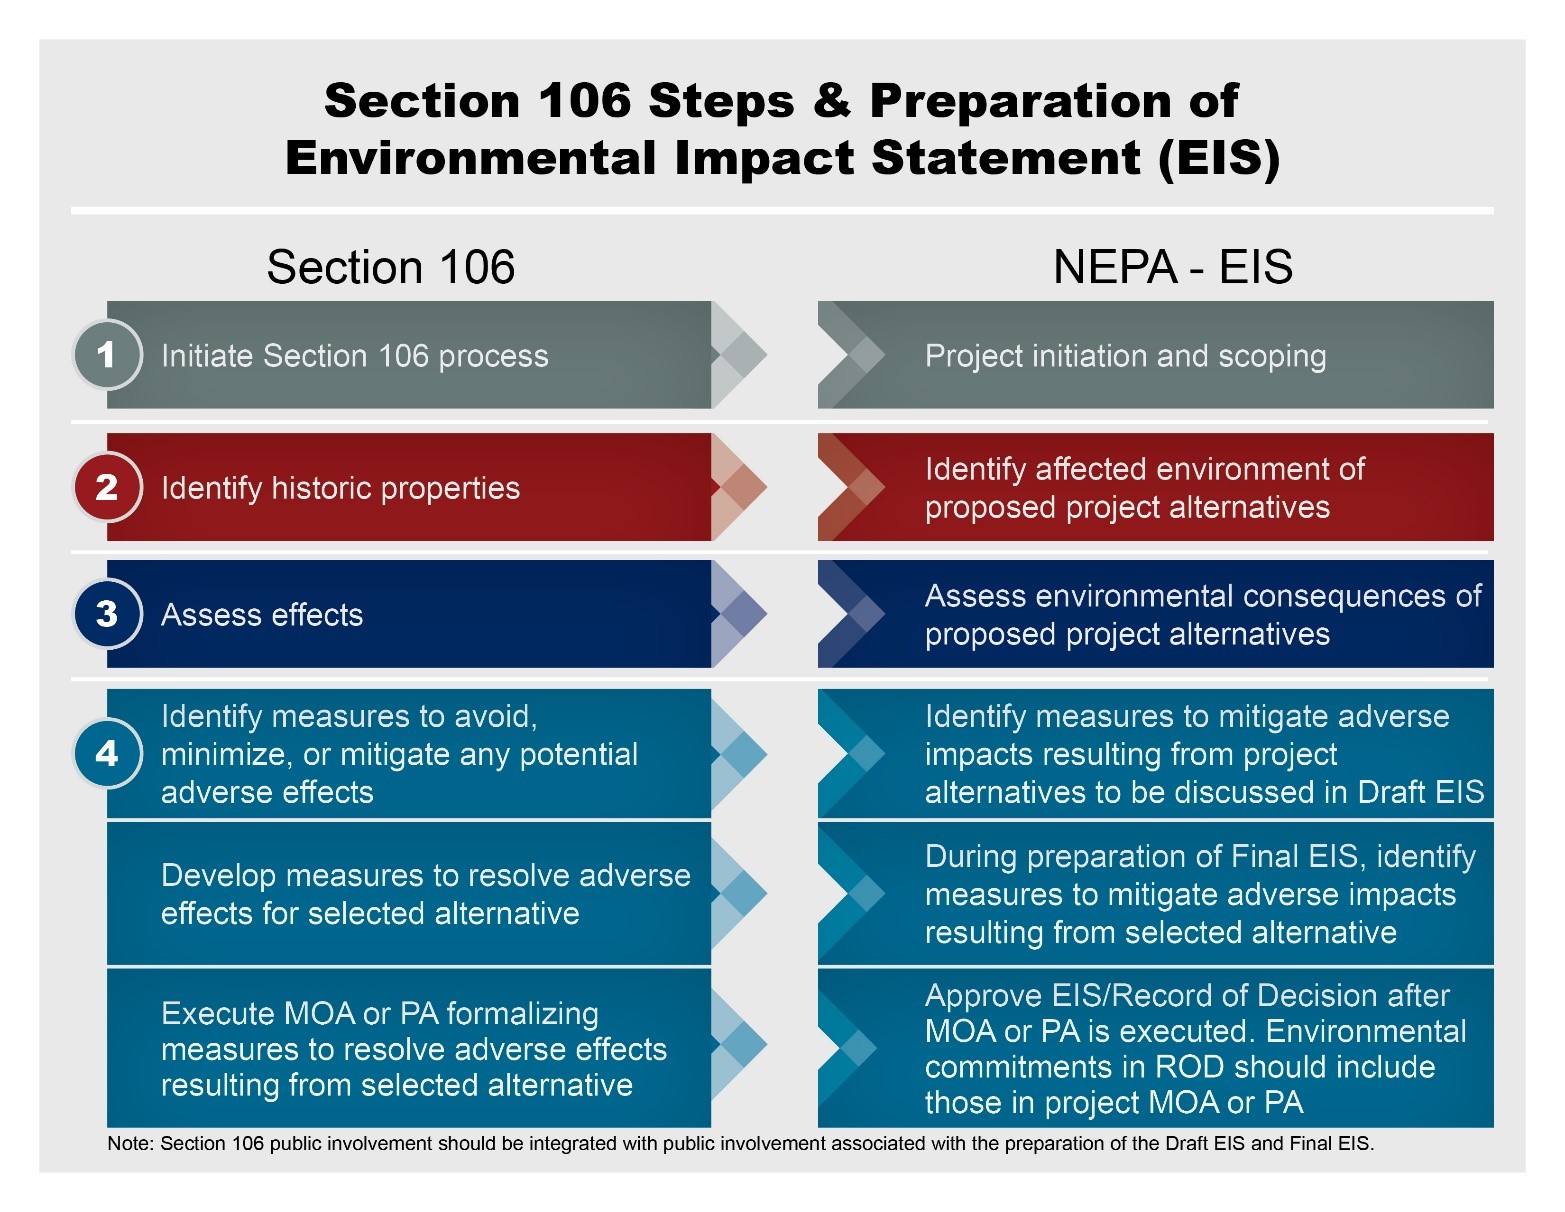 A graphic of section 106 steps and preparation of environmental impact statement